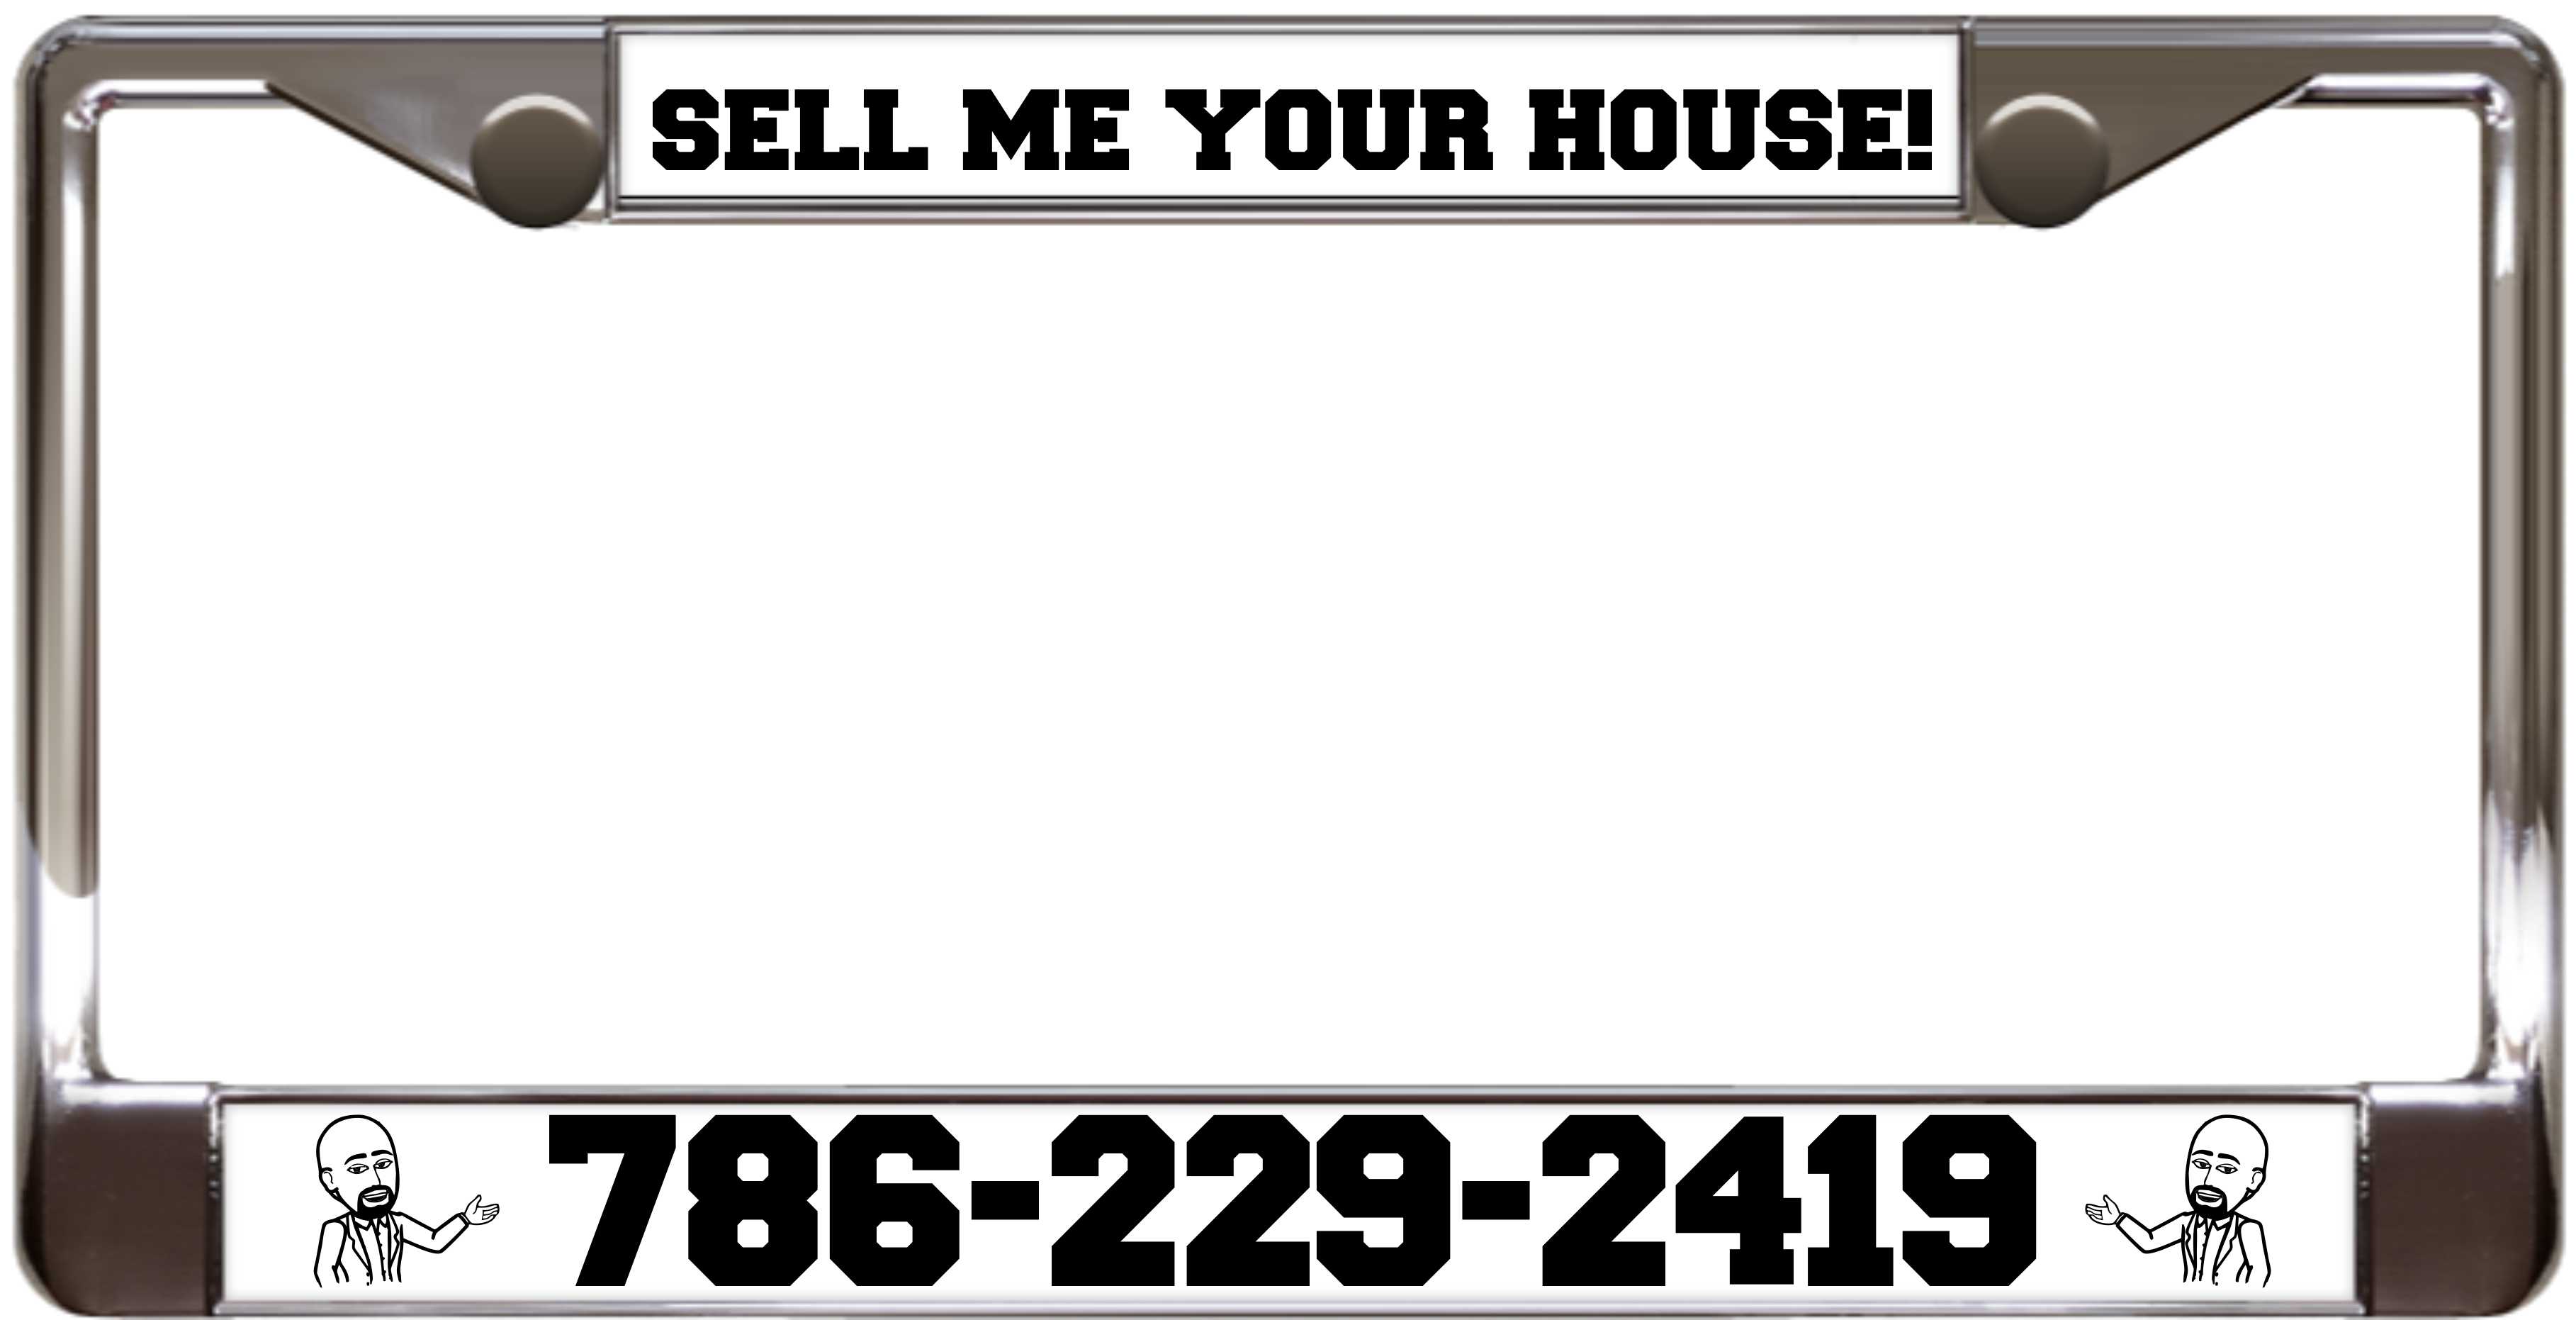 SELL ME YOUR HOUSE! - Custom License Plate Frame